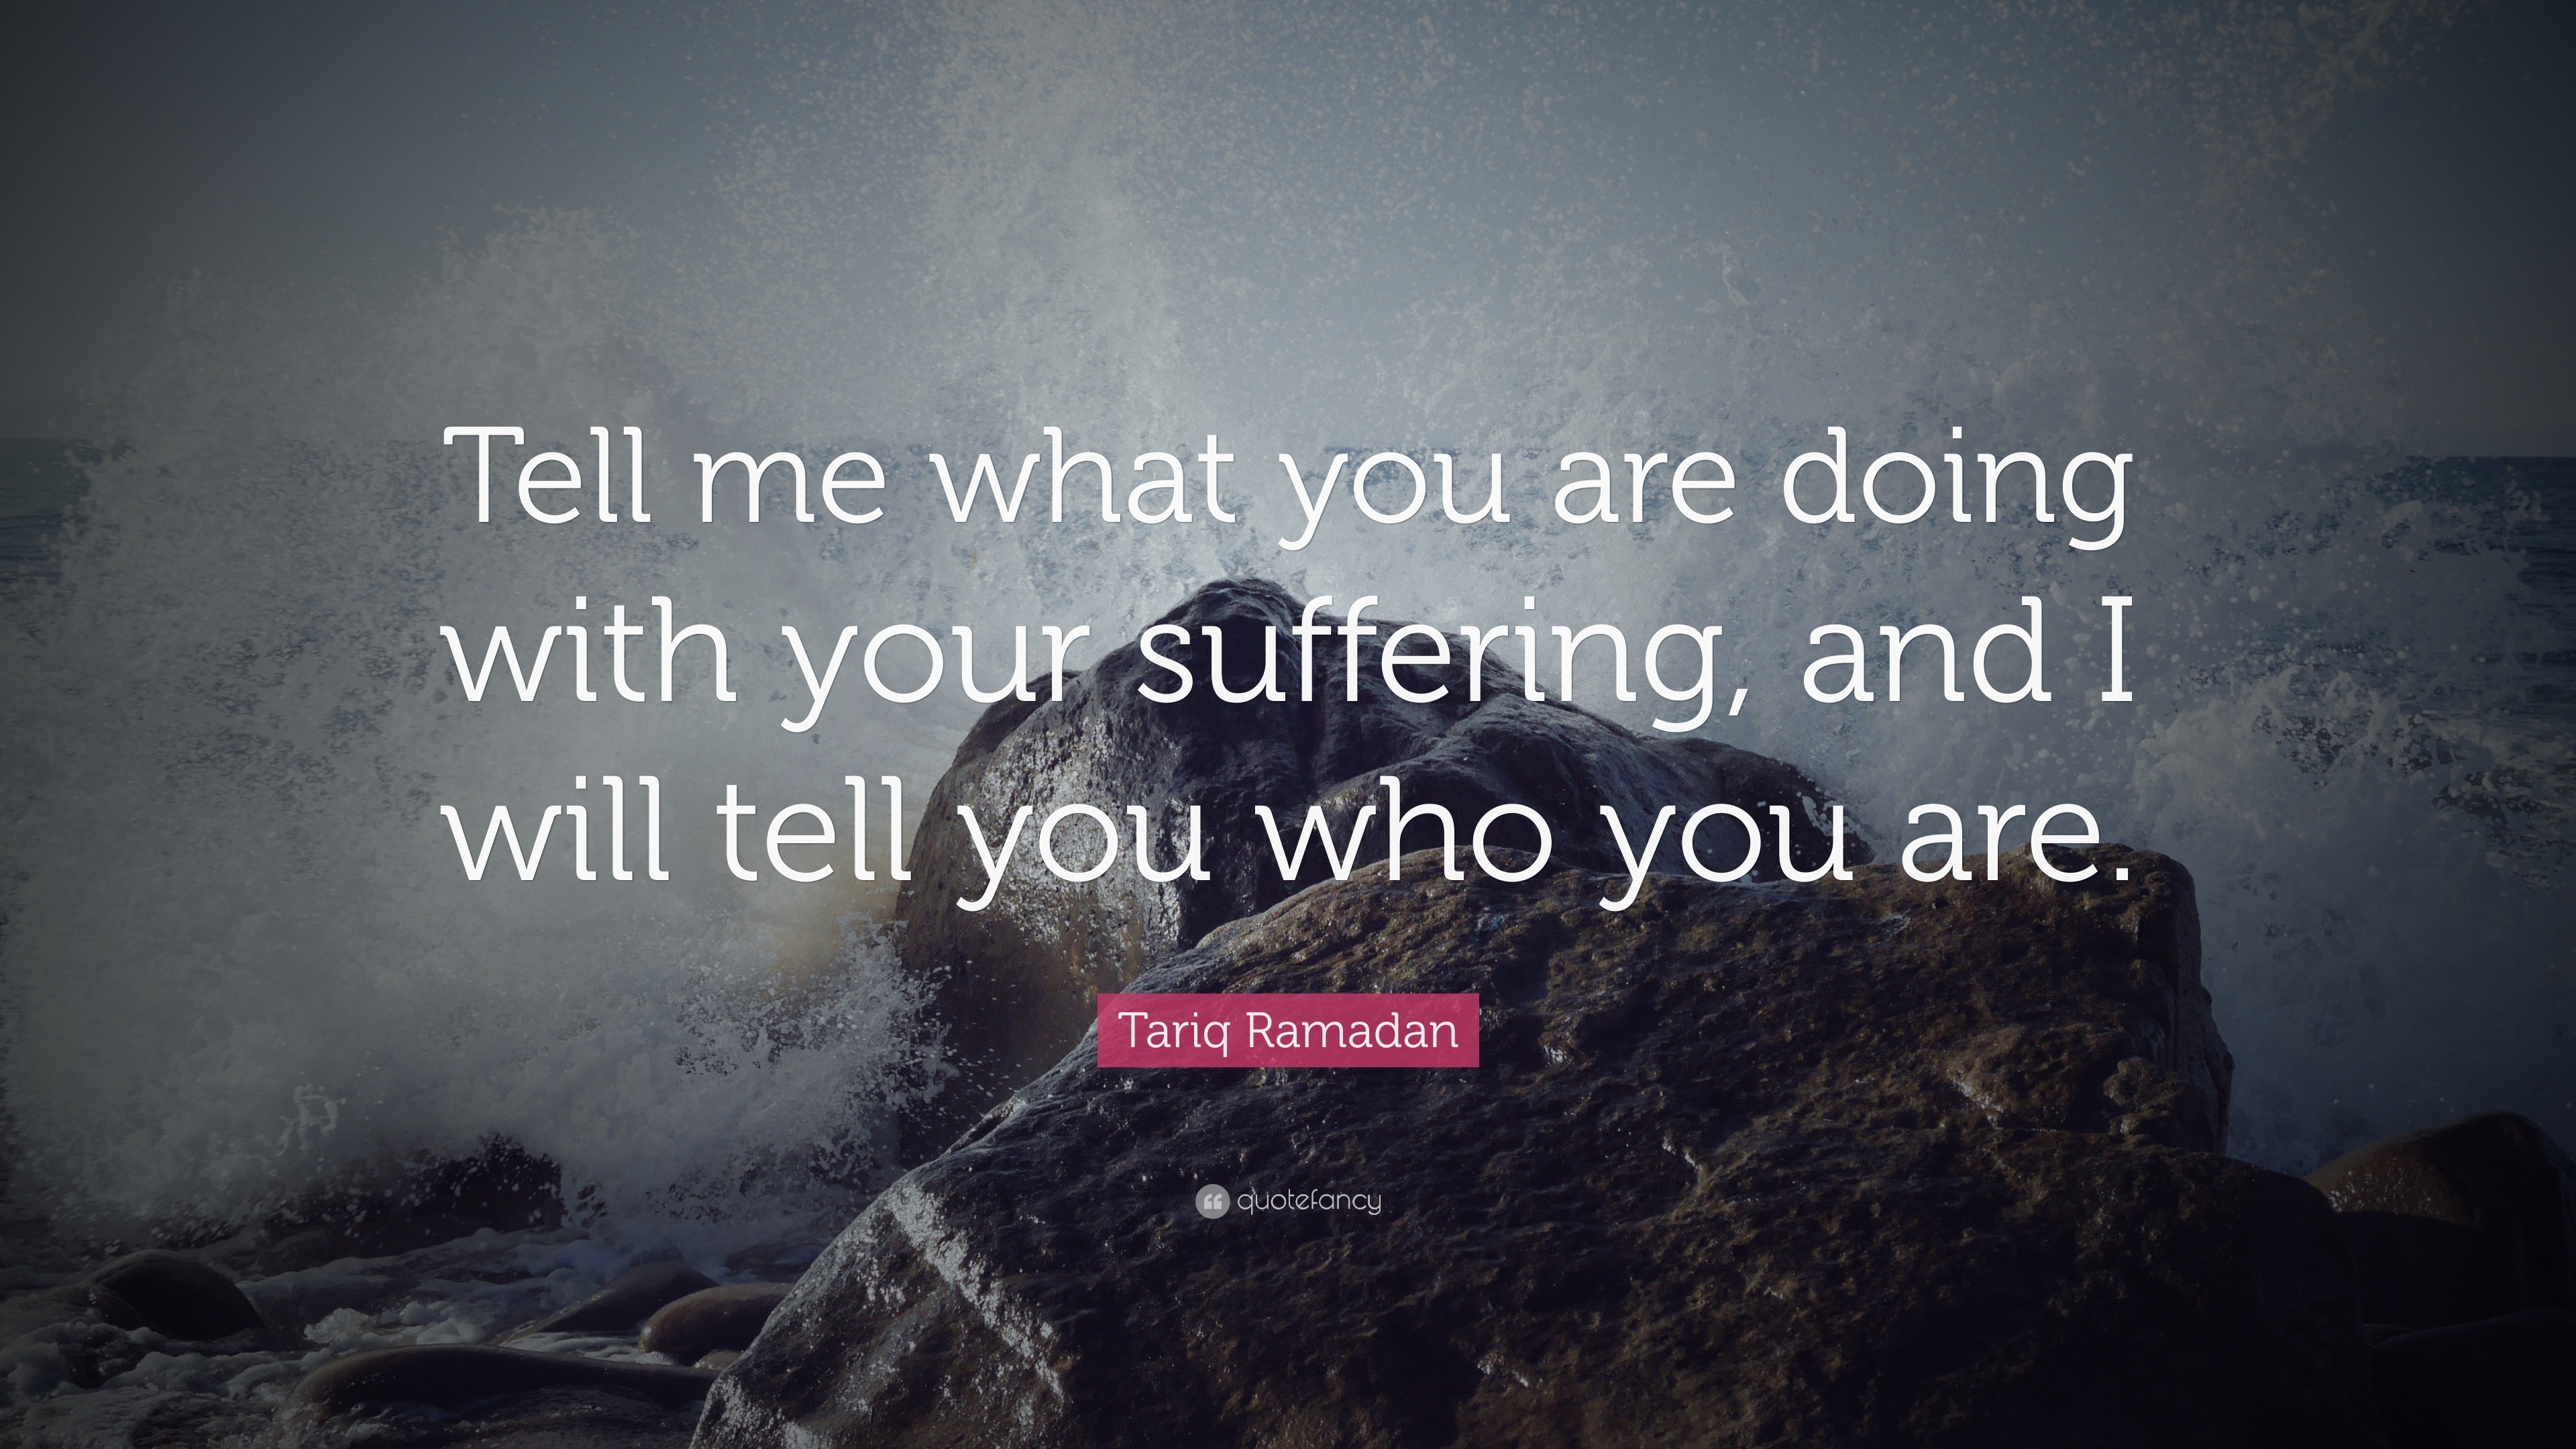 Tariq Ramadan Quote: “Tell me what you are doing with your suffering ...